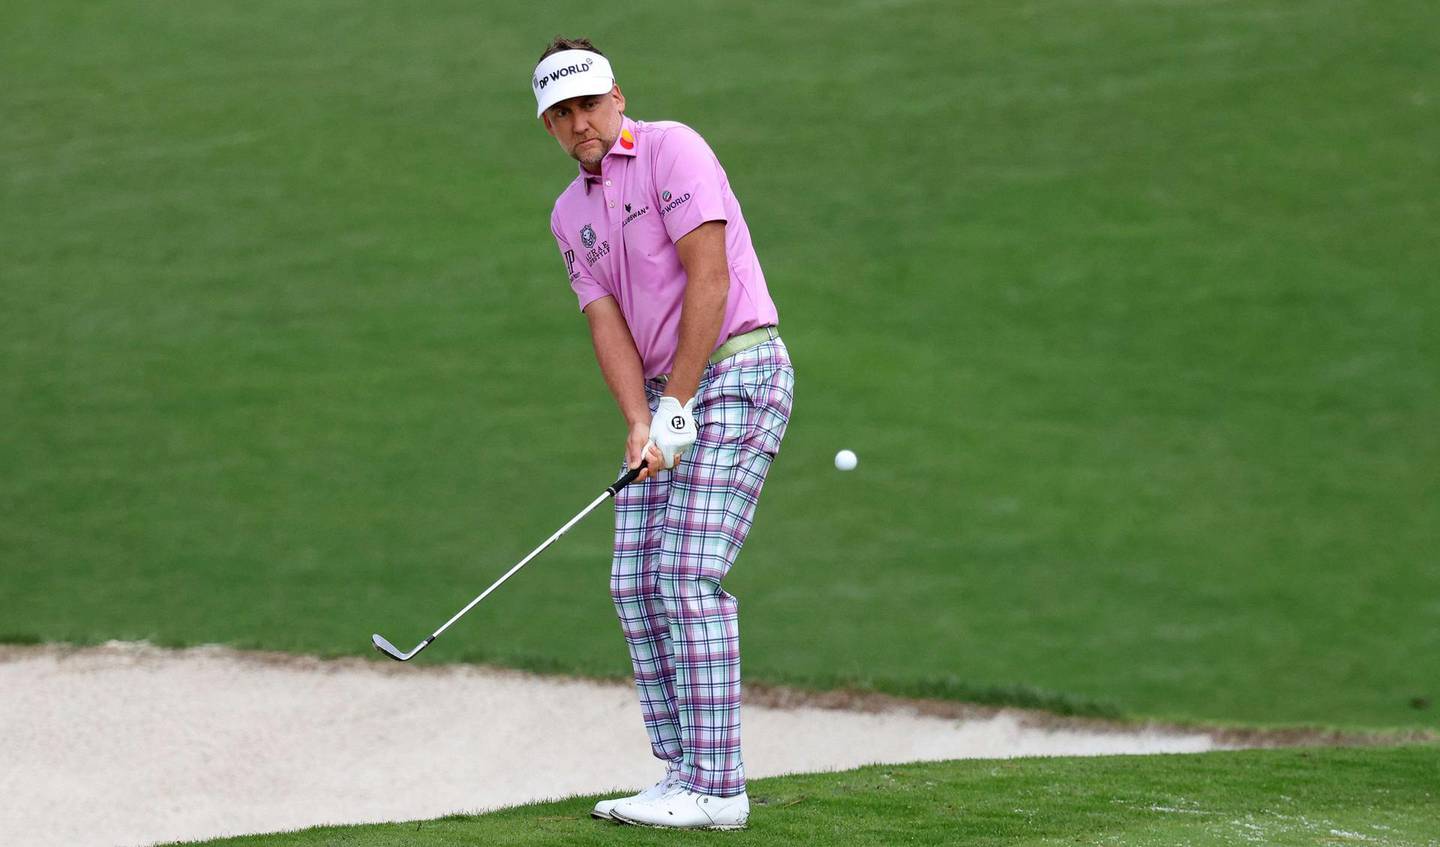 AUGUSTA, GEORGIA - NOVEMBER 15: Ian Poulter of England plays a shot on the 10th hole during the final round of the Masters at Augusta National Golf Club on November 15, 2020 in Augusta, Georgia.   Rob Carr/Getty Images/AFP
== FOR NEWSPAPERS, INTERNET, TELCOS & TELEVISION USE ONLY ==
